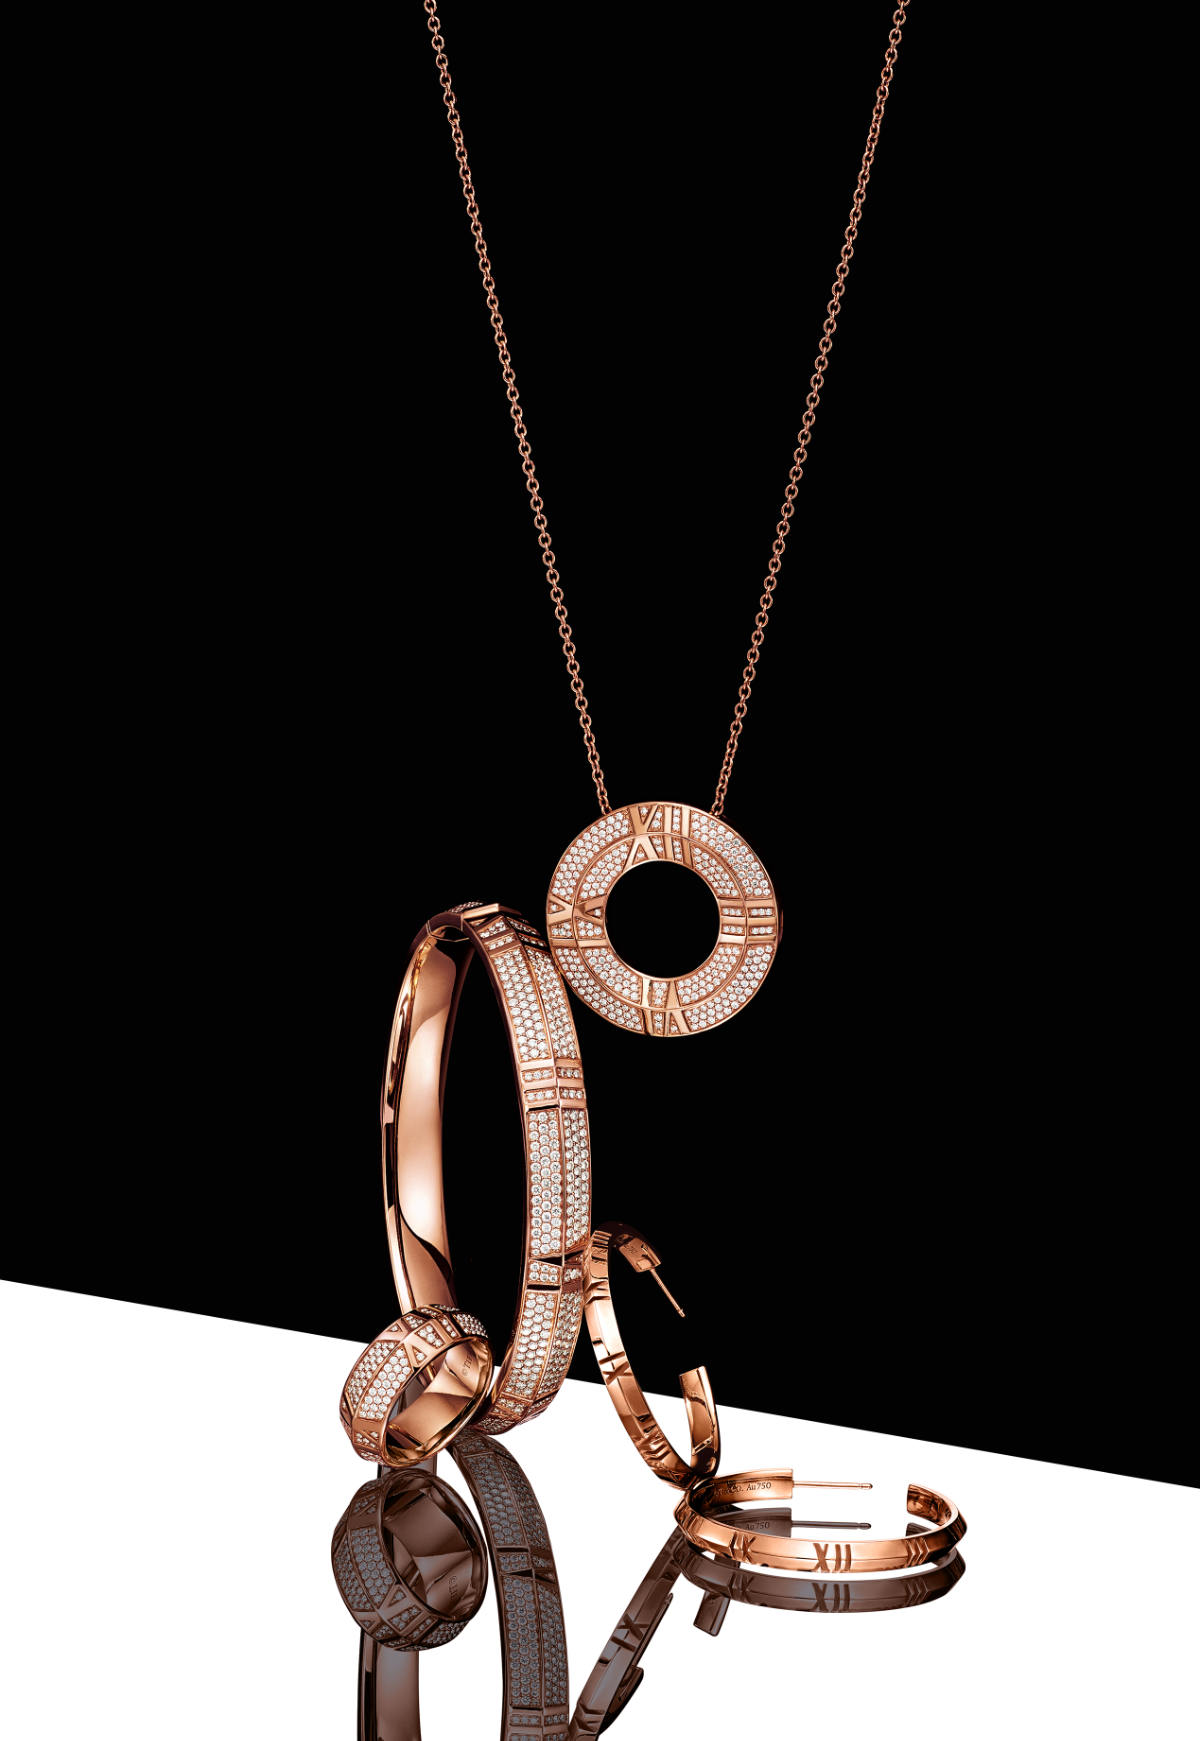 Tiffany & Co. Puts a Bold New Spin on its Atlas™ Collection